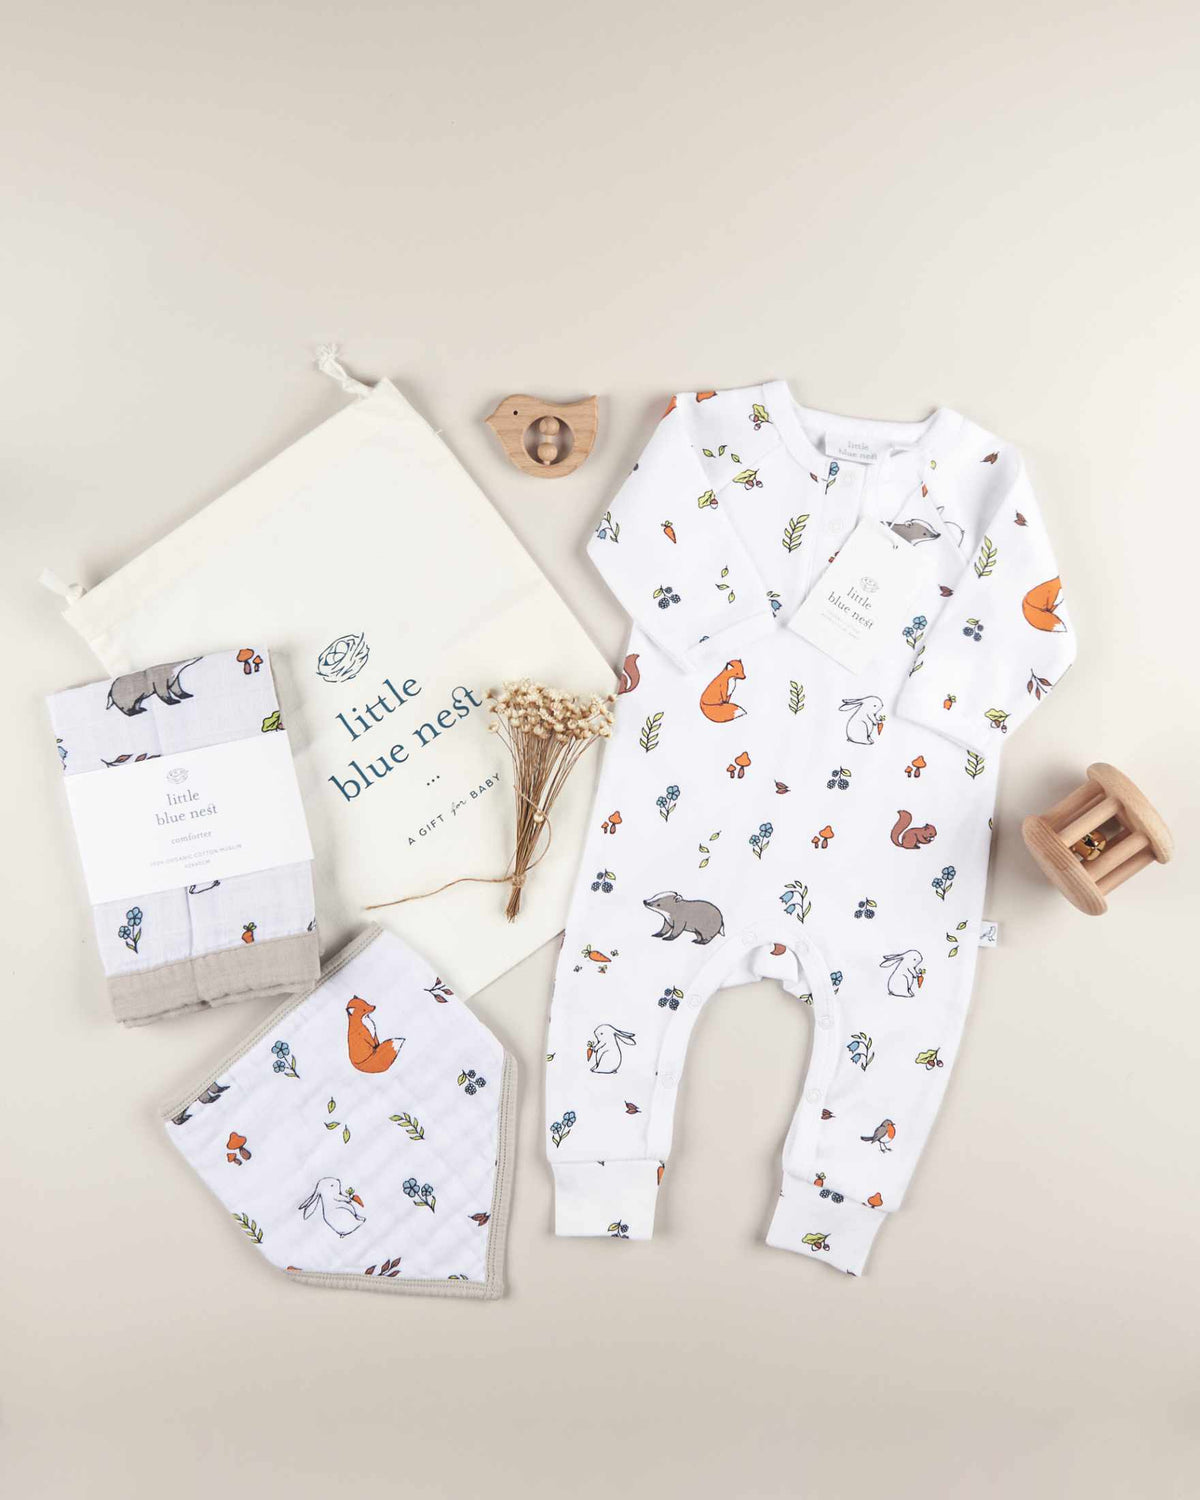 Woodland pattern flat lay example of products for baby